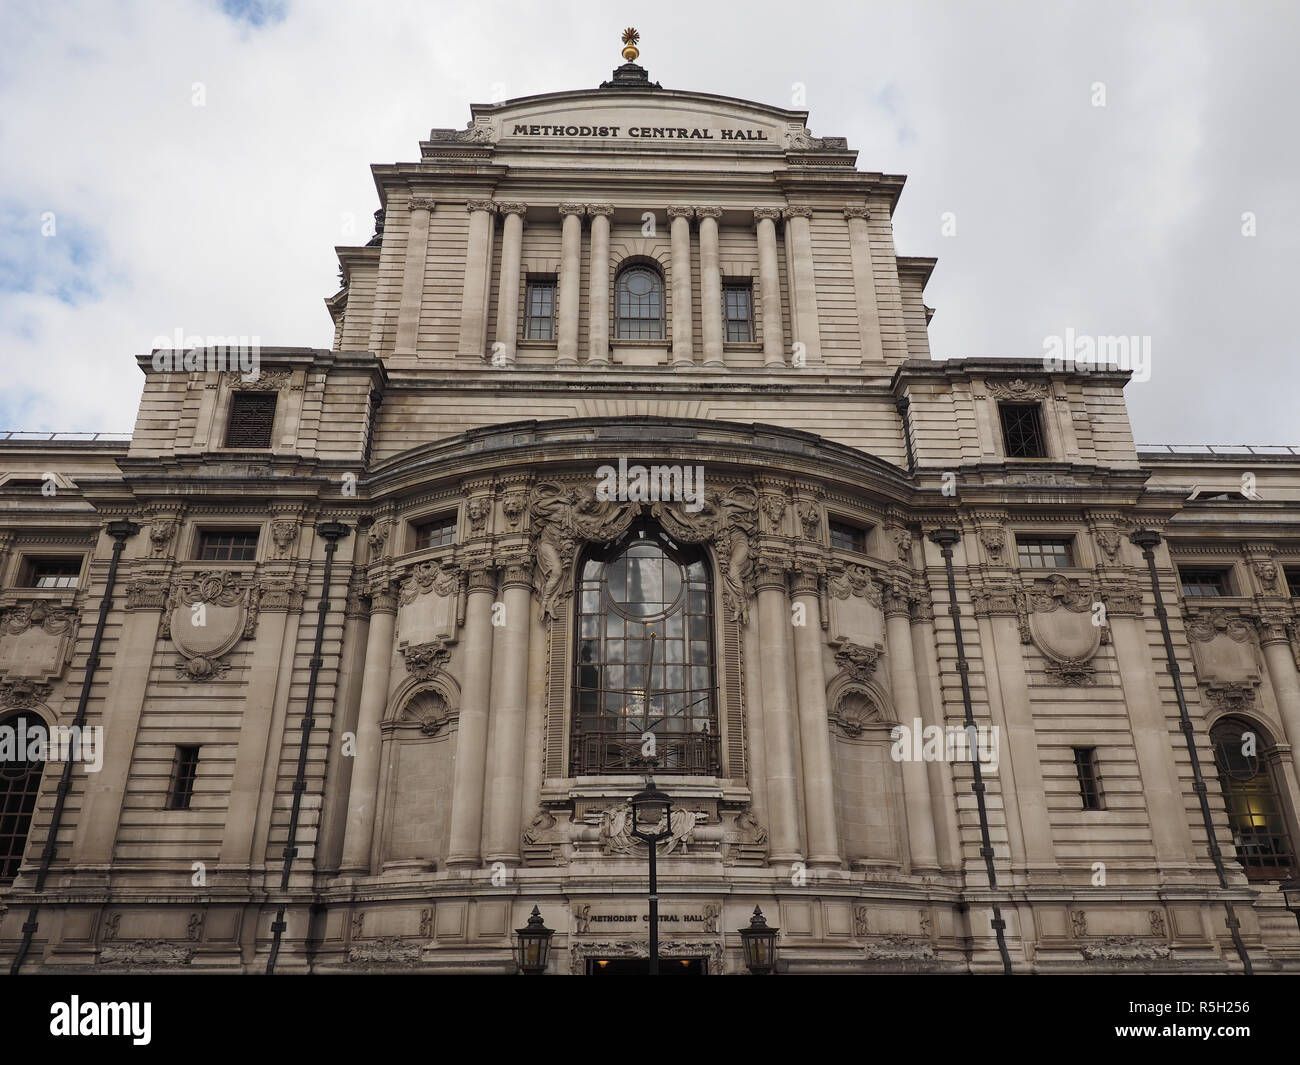 Methodist Central Hall in London Stock Photo